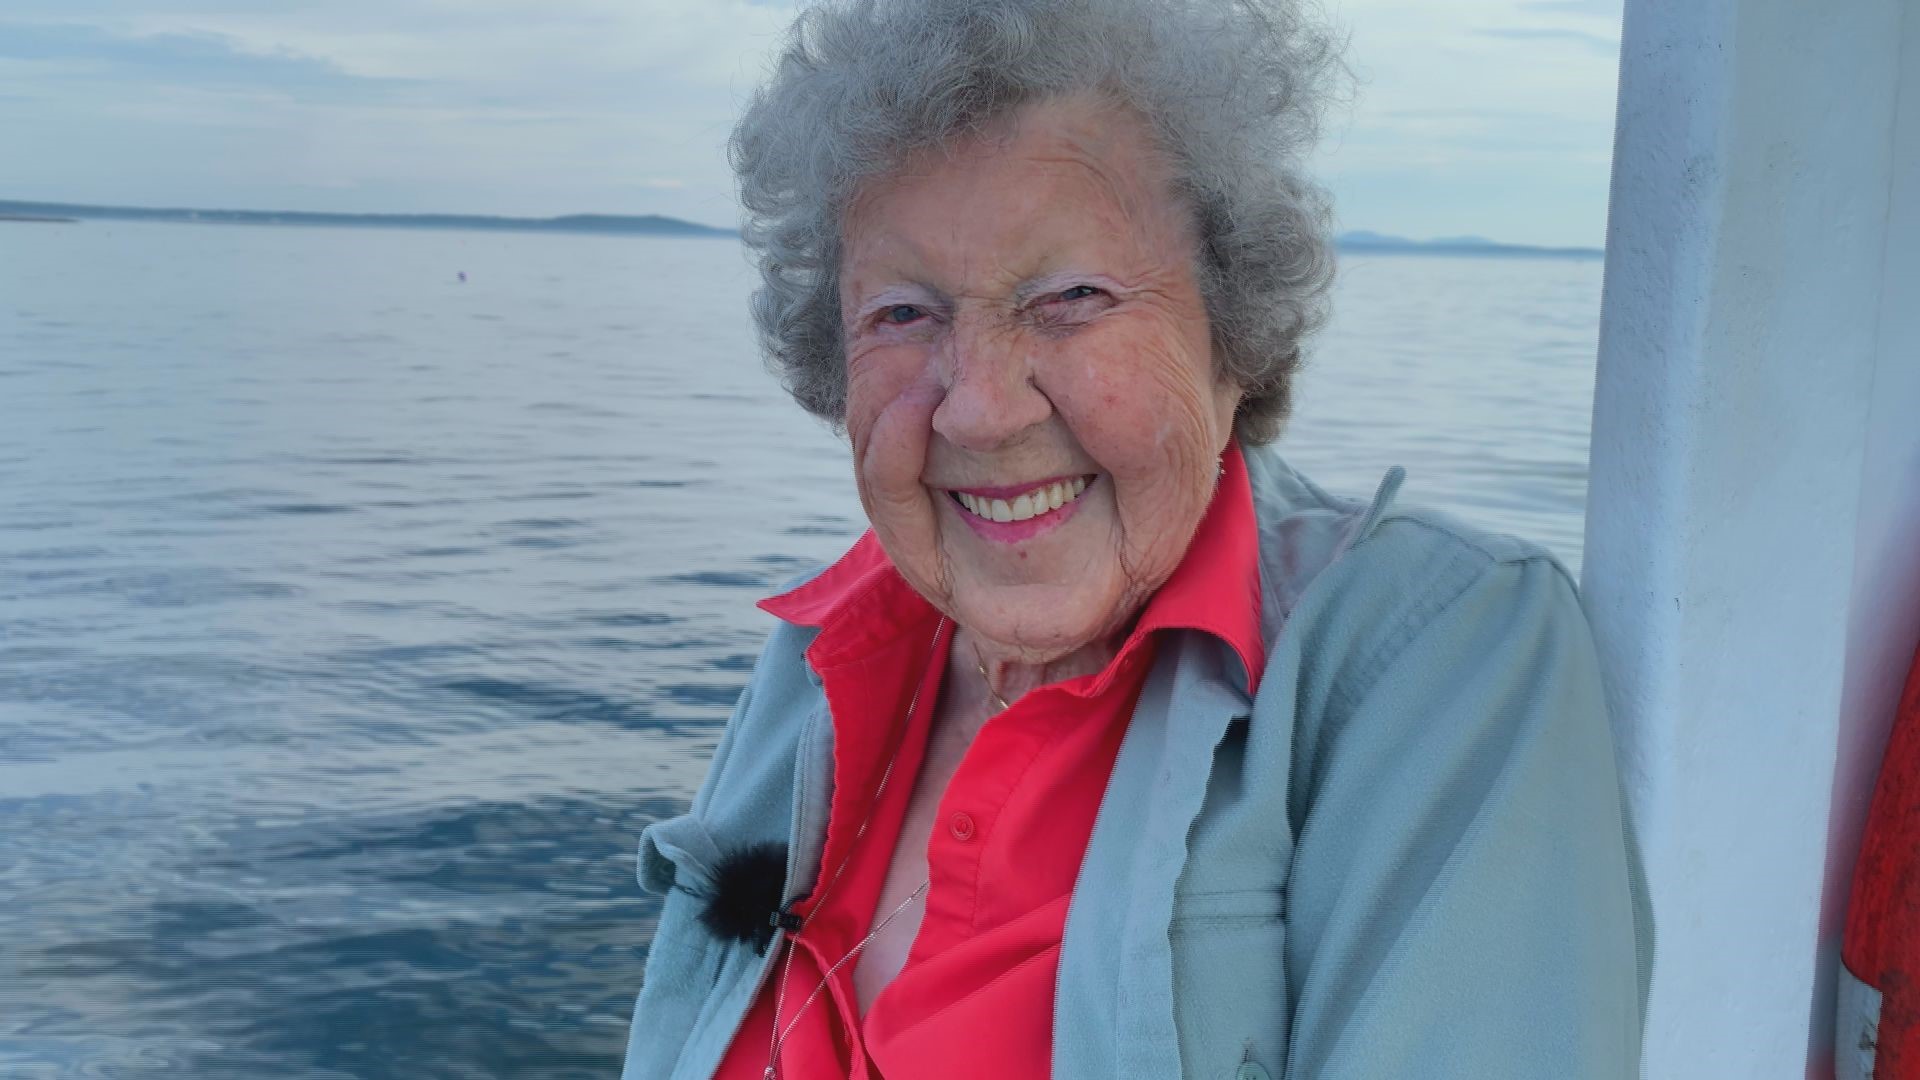 At 101 Virginia Oliver may be the oldest lobstering person in the world and has no plans to give it up. Since our story in June, news of the Lobster Lady has spread.